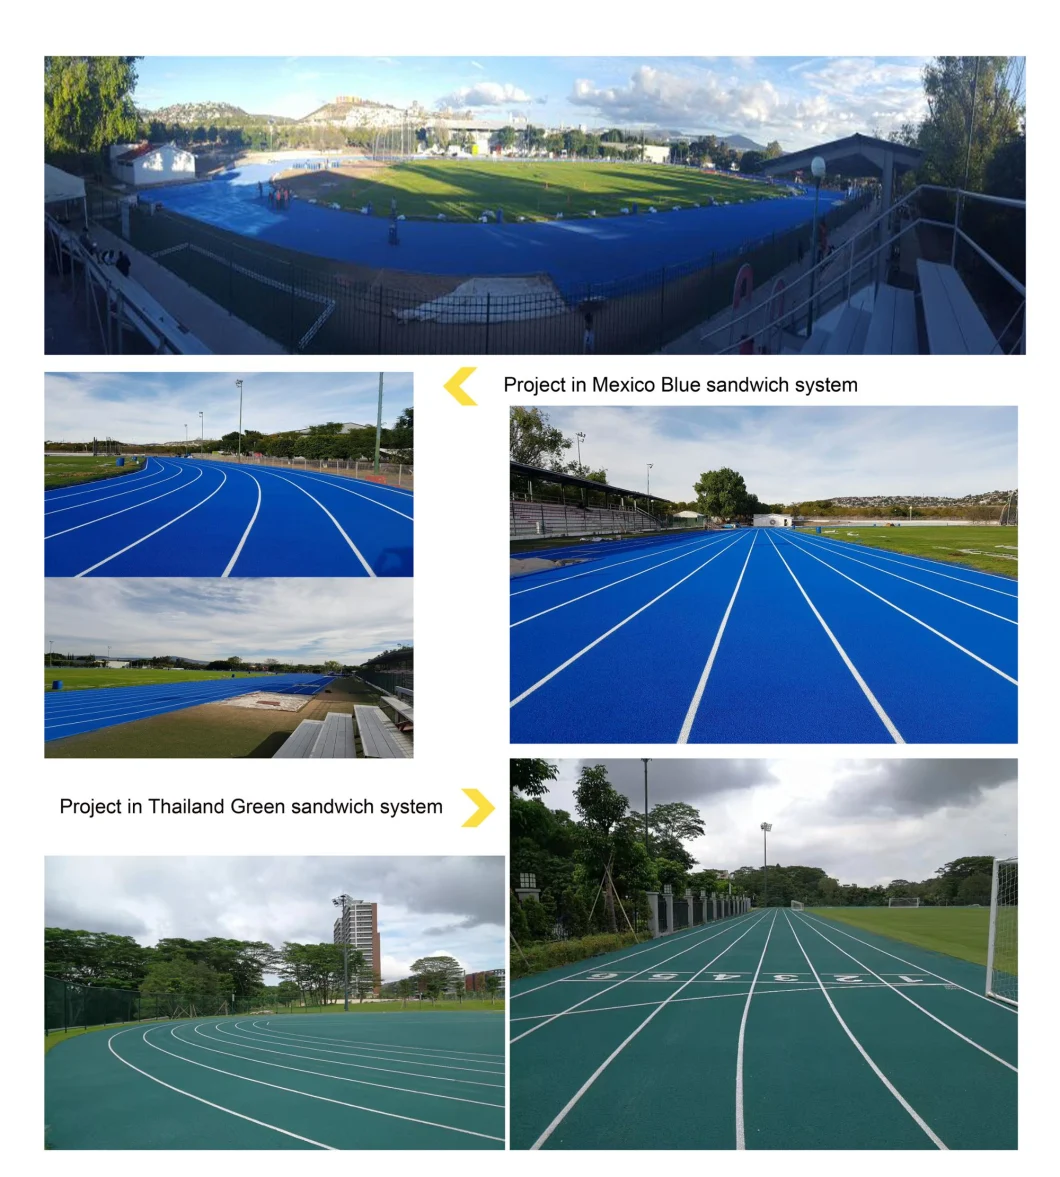 Playground Full Pour Spray Coating System 13mm Running Track